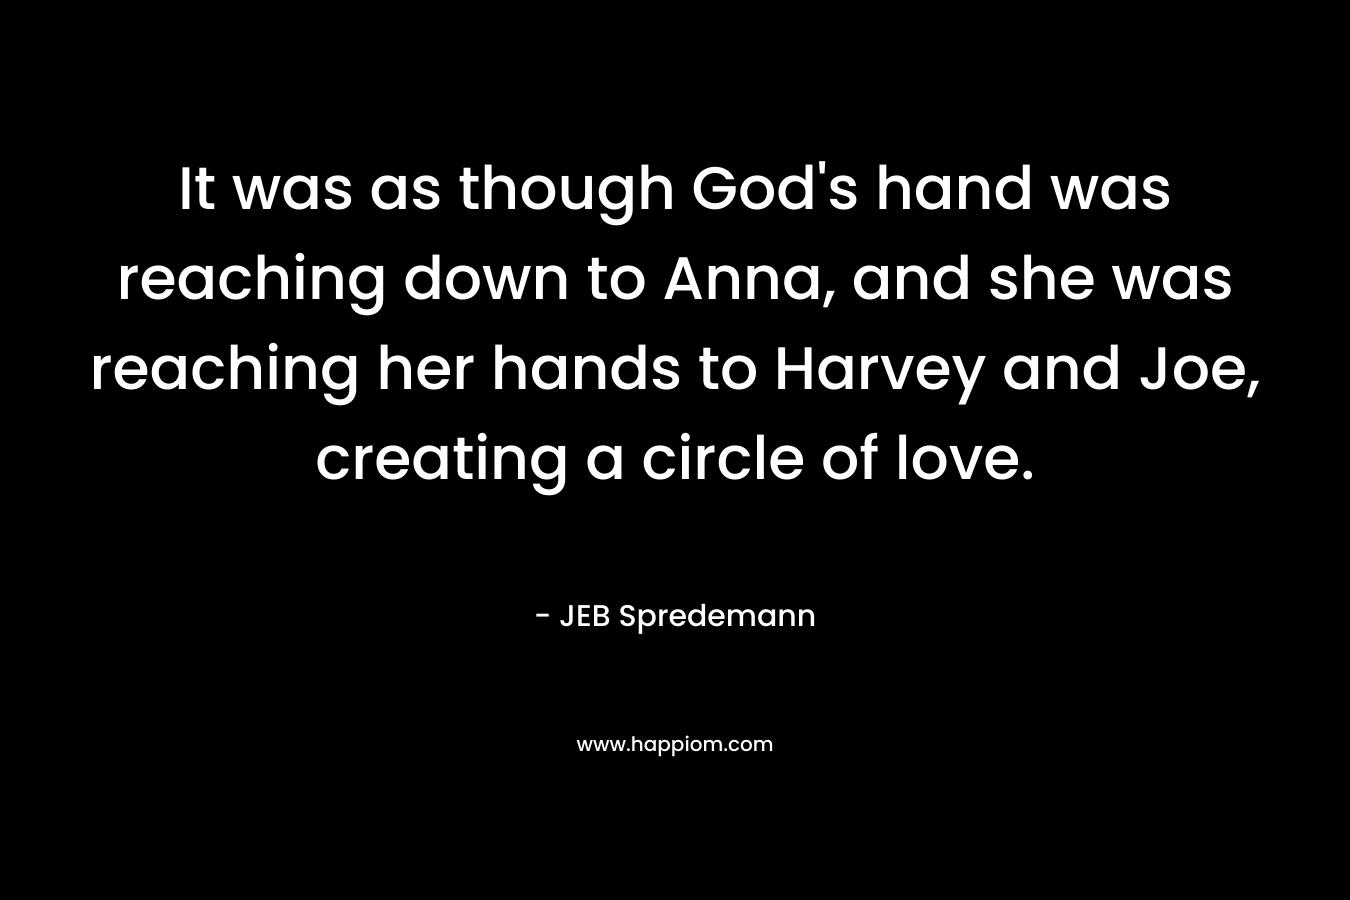 It was as though God’s hand was reaching down to Anna, and she was reaching her hands to Harvey and Joe, creating a circle of love. – JEB Spredemann